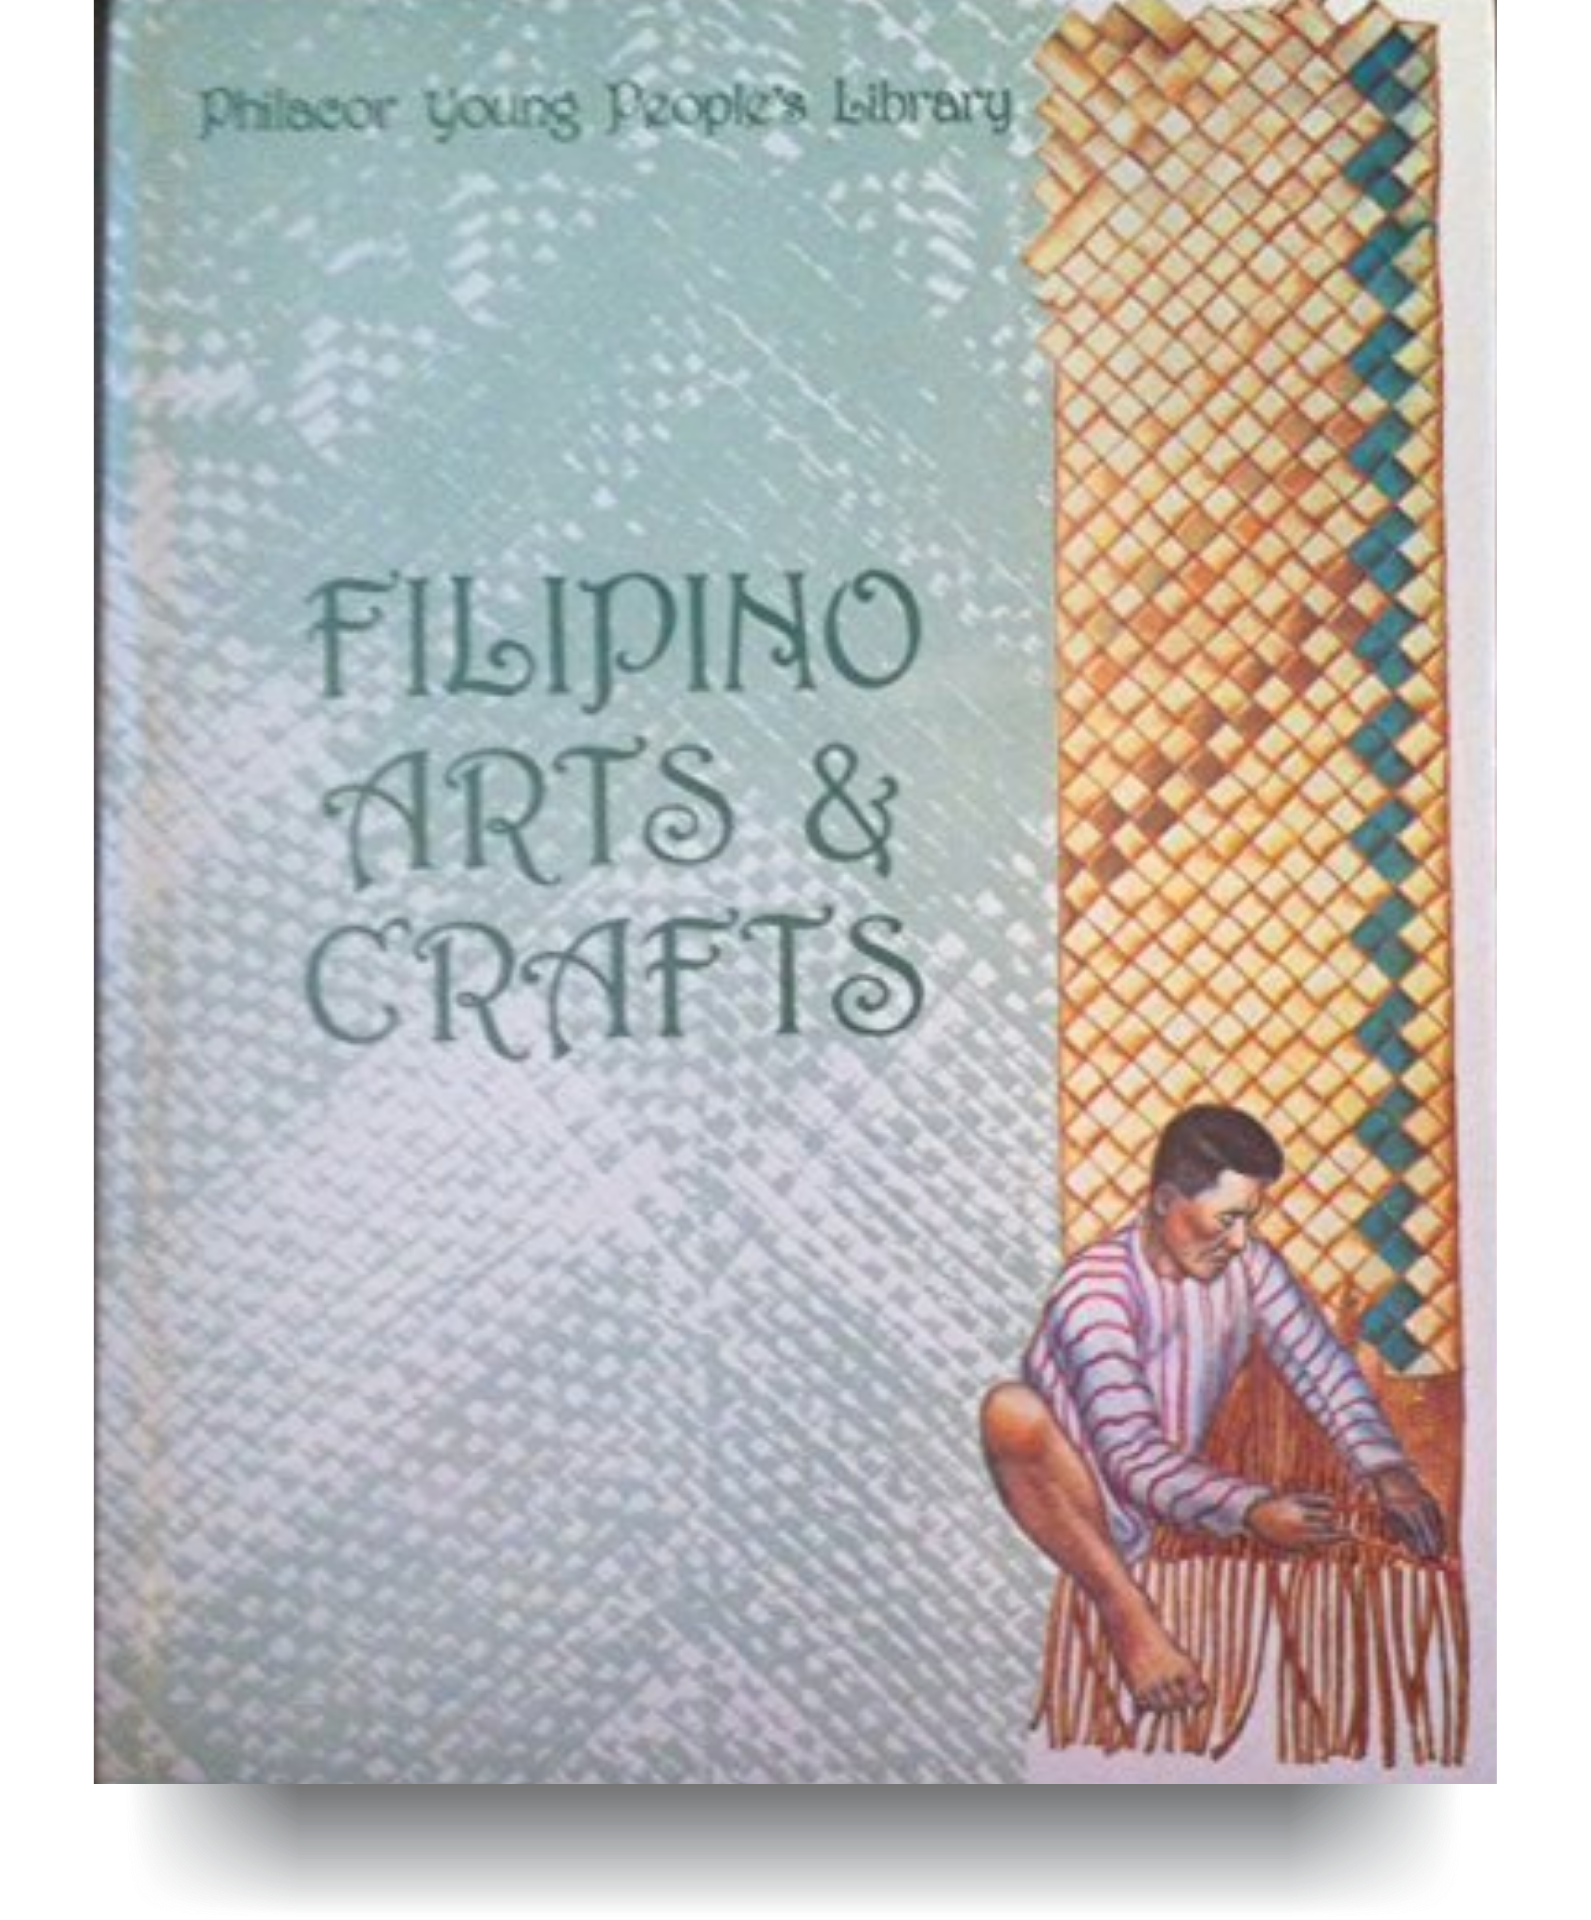 Filipino Arts & Crafts (Philacor young people's library)